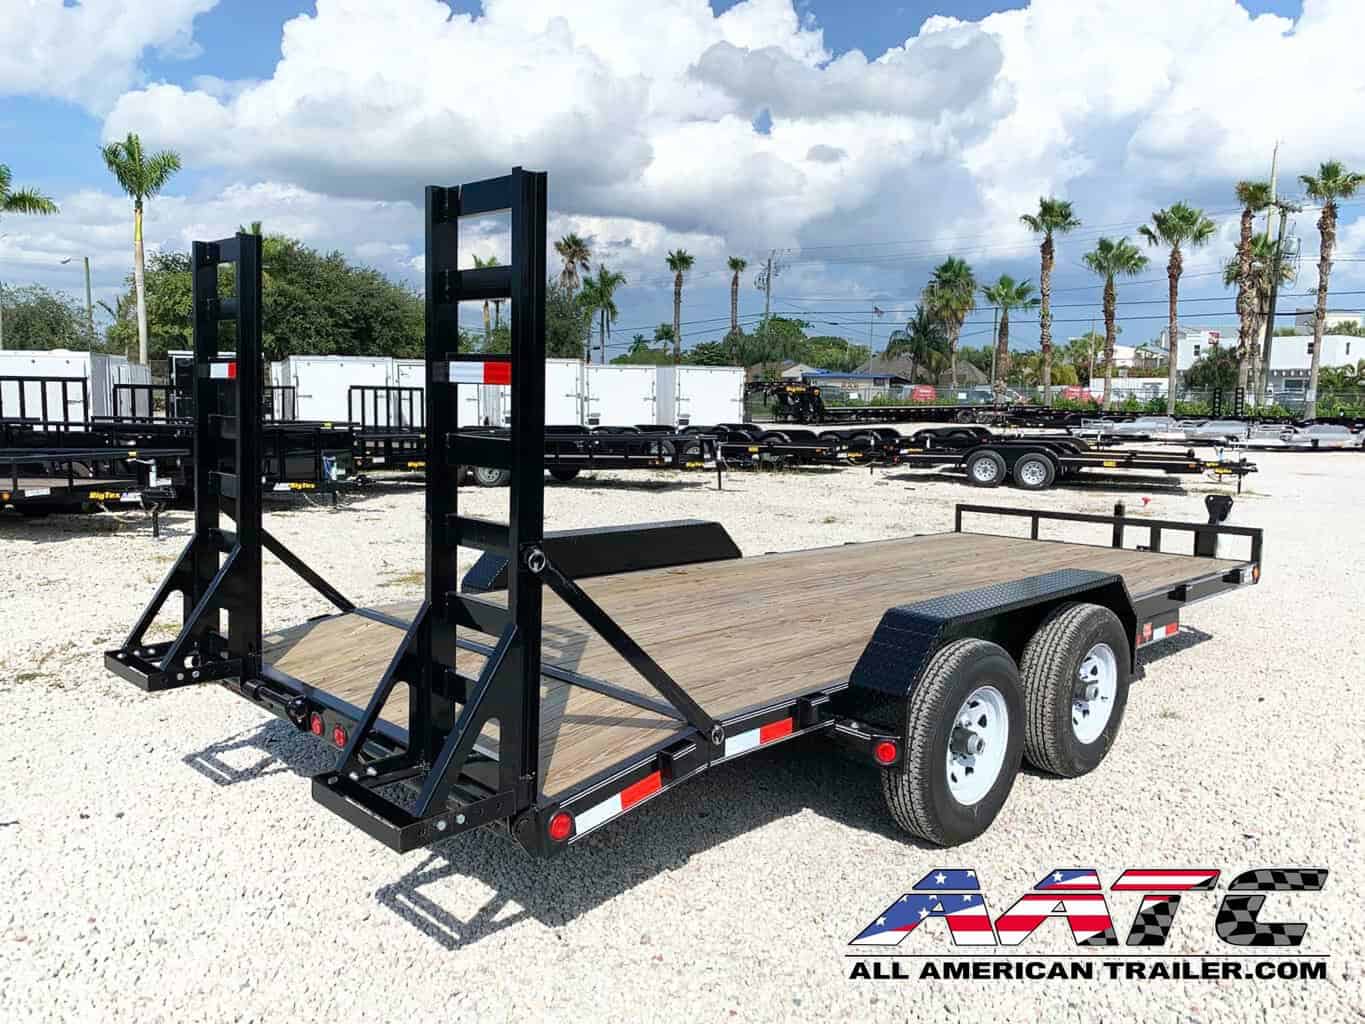 A black PJ 18-foot equipment trailer with a 10,000 GVWR. This PJ Trailer features a straight deck with fold-up ramps, providing a load capacity of 7060 lbs. It is designed for bumper pull hitch type towing and equipped with electric brakes for added safety. The trailer is perfect for hauling various equipment and cargo, and it's from the renowned PJ Trailers brand.